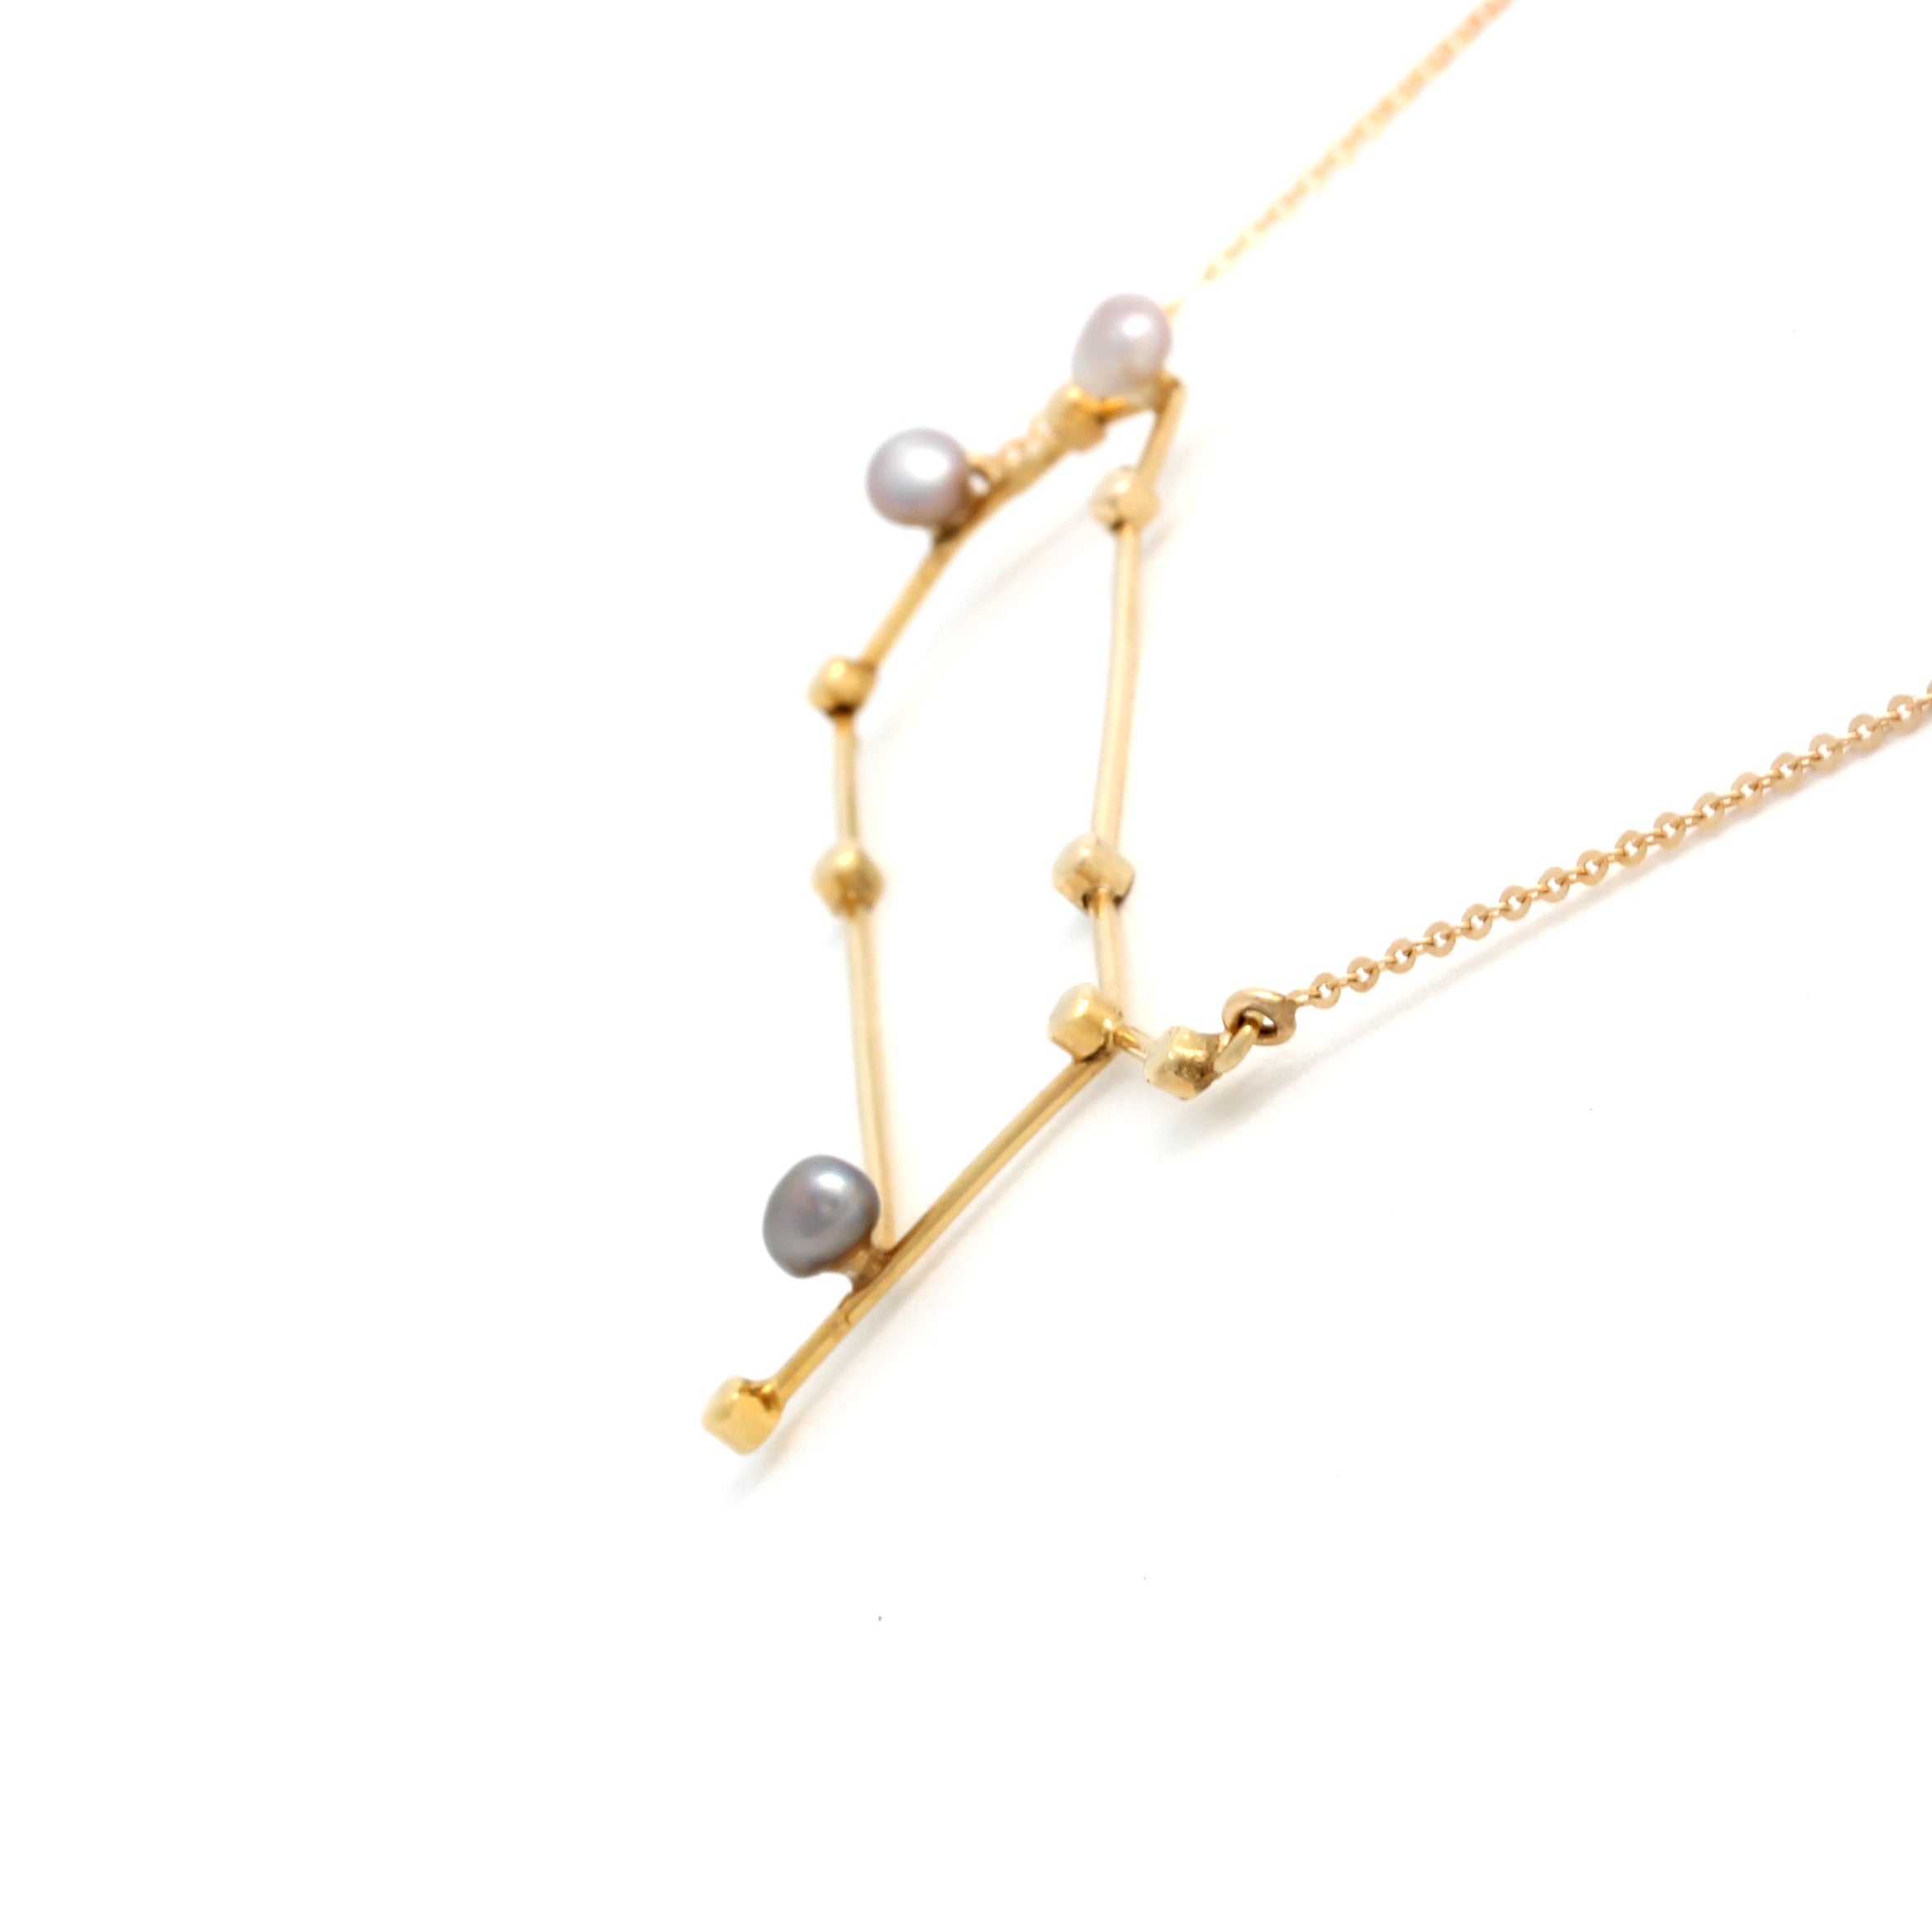 "Gemini (May 21st - Jun 20th)" 14K Yellow Gold Pendant and Chain with Cortez Keshi Pearls